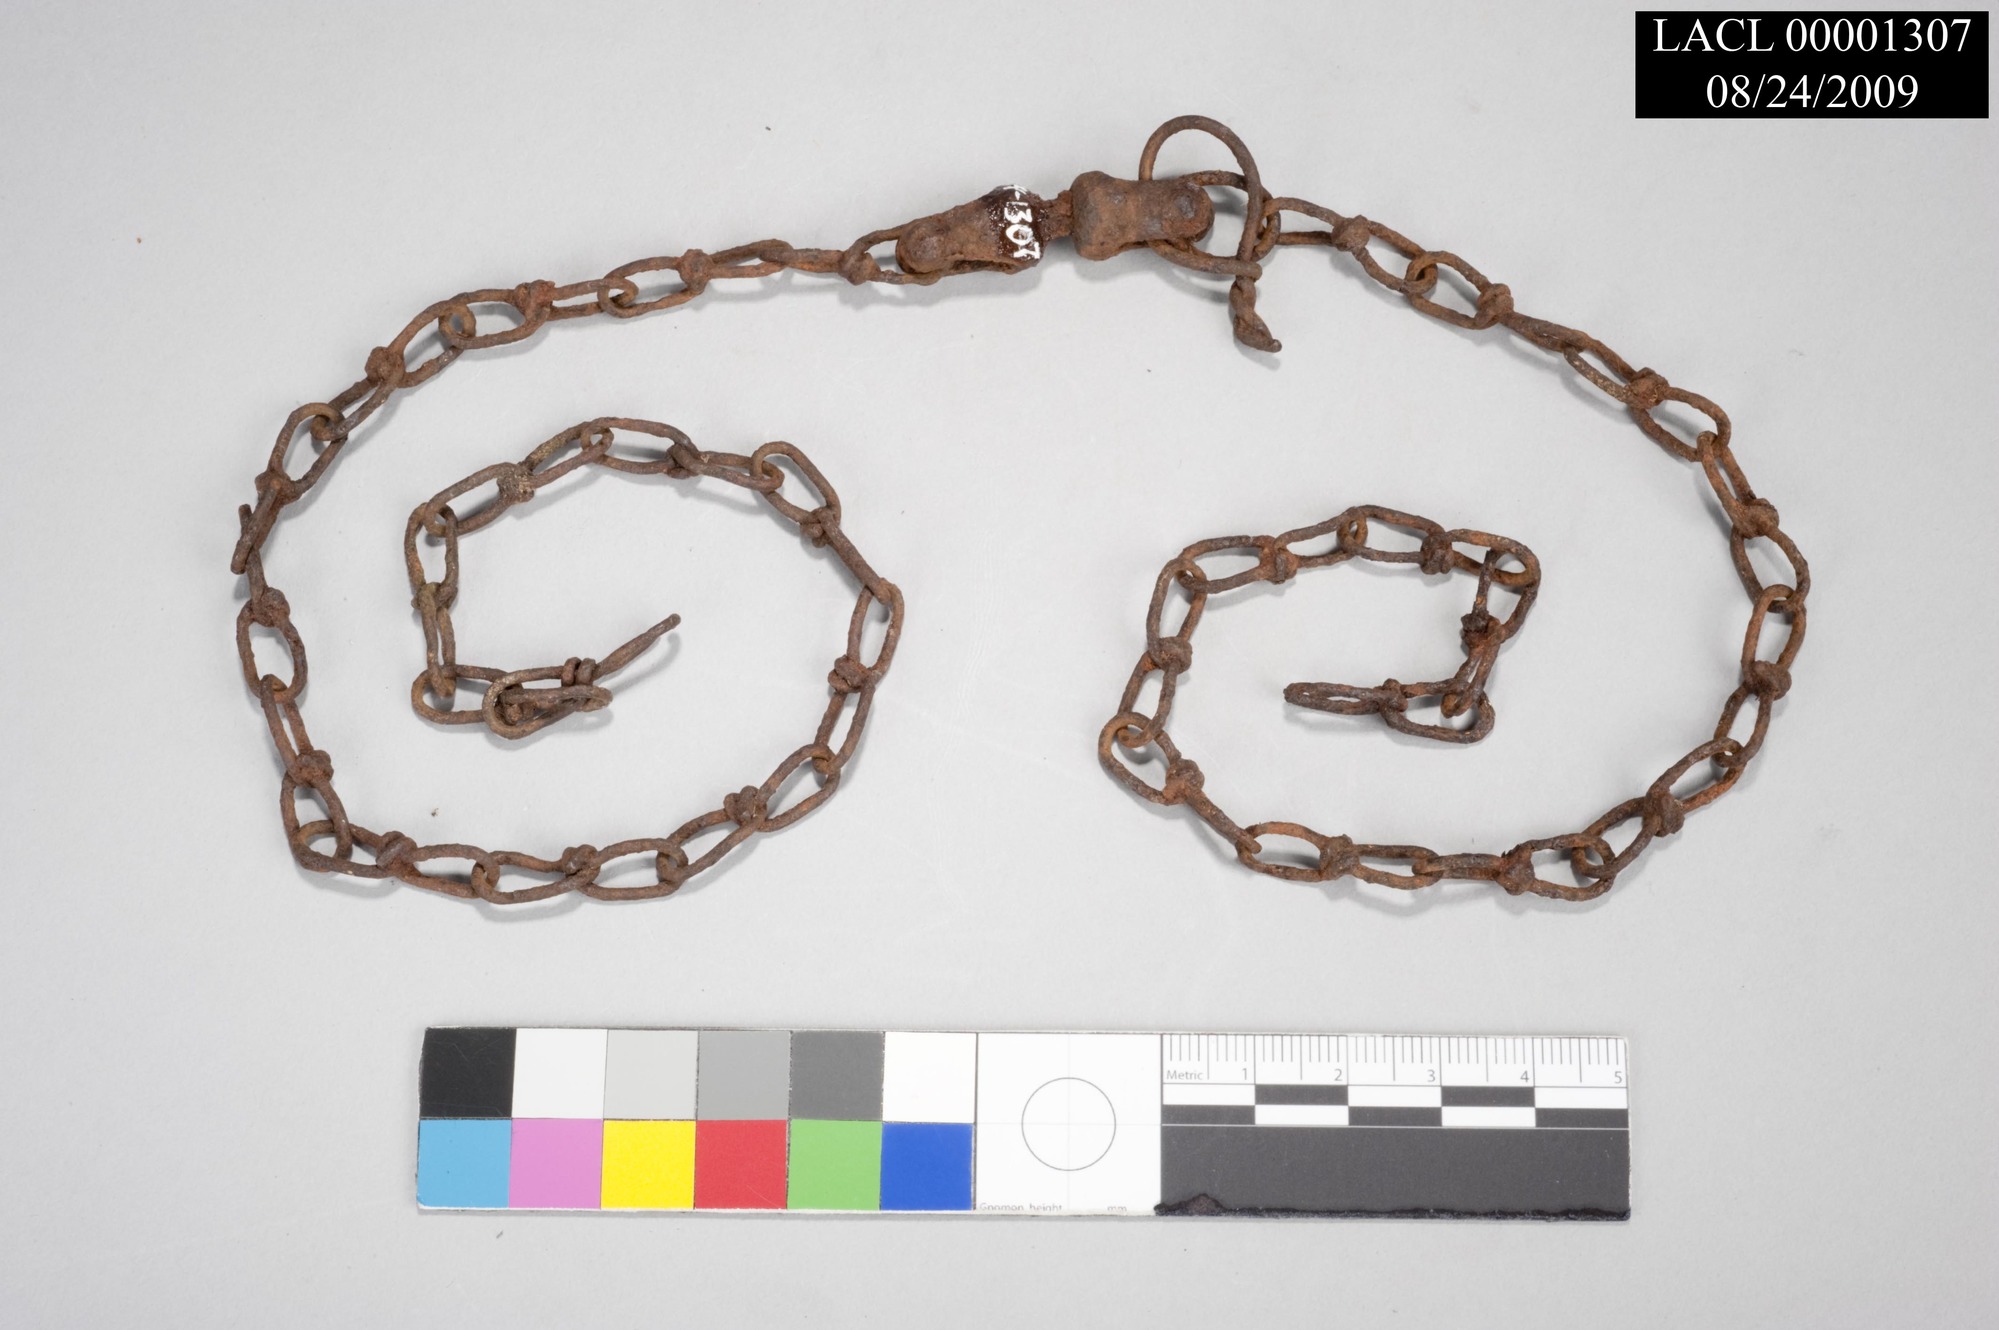 Image of a rusted, wire chain.